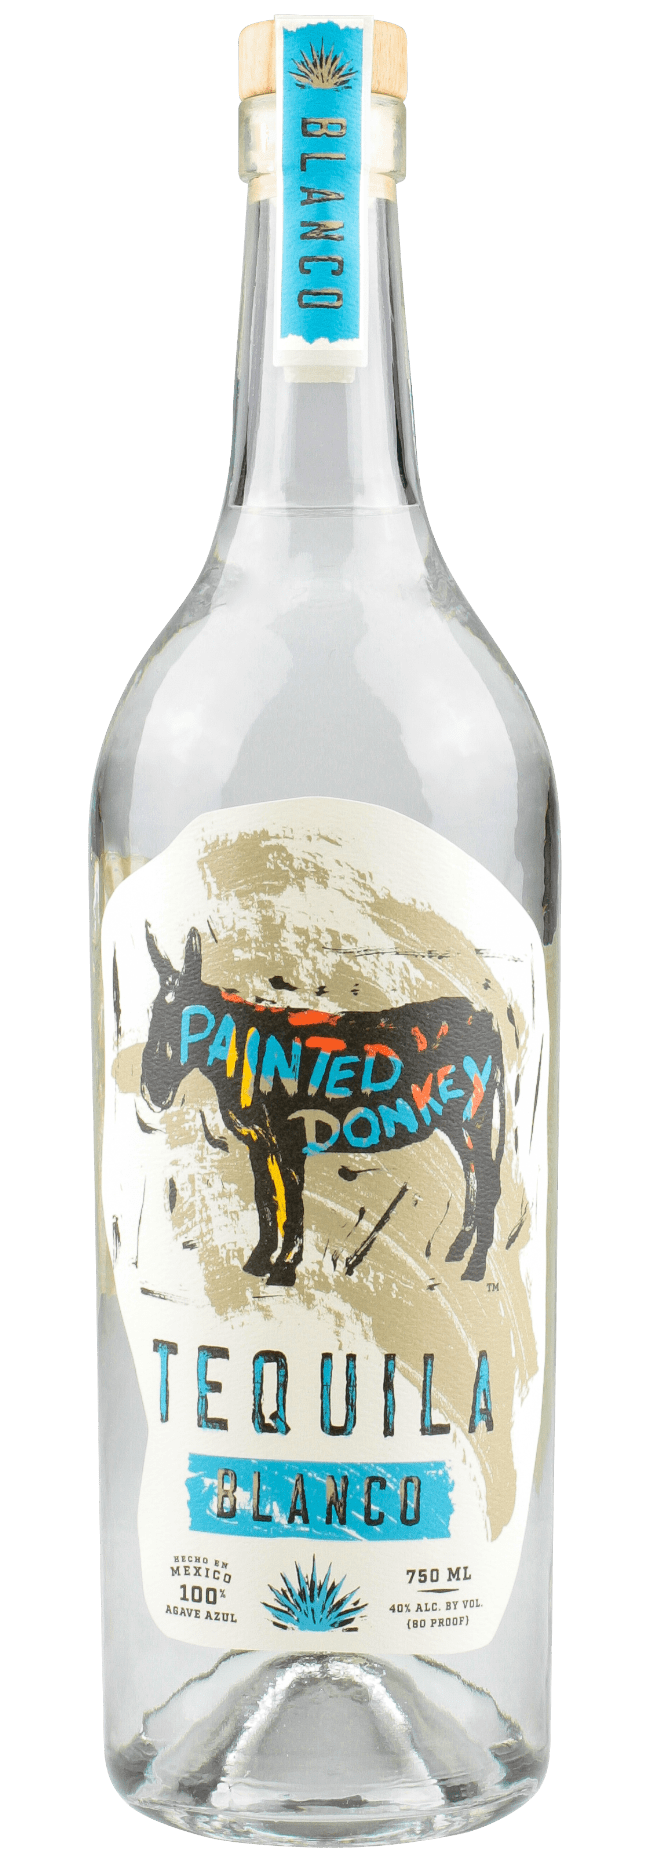 Painted Donkey Tequila Blanco 750ml